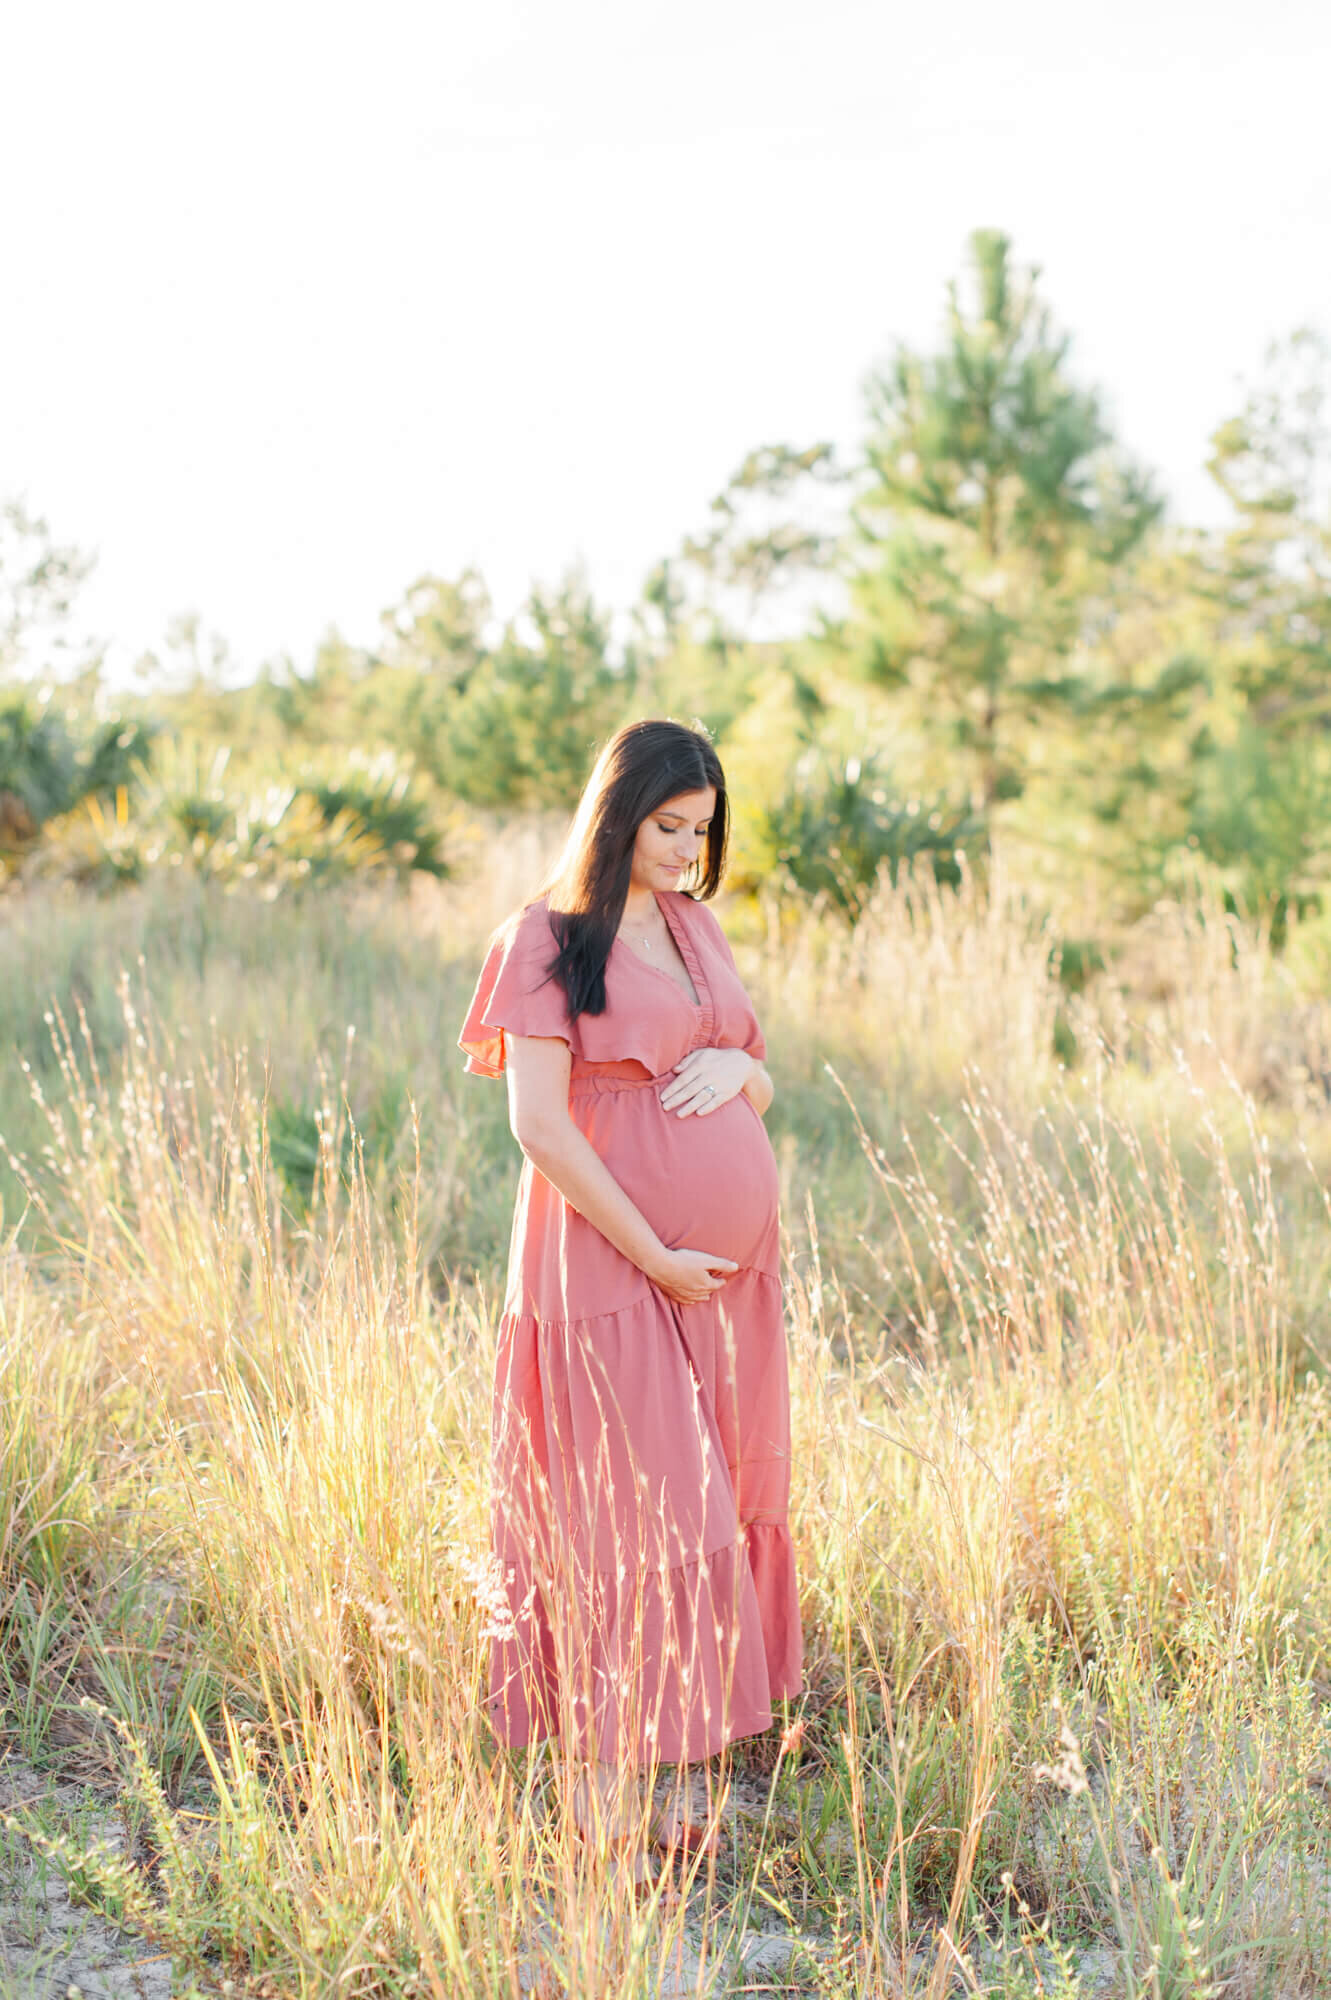 Winter Park maternity photographer captures mother standing in tall grass field wearing pink dress and holding her belly